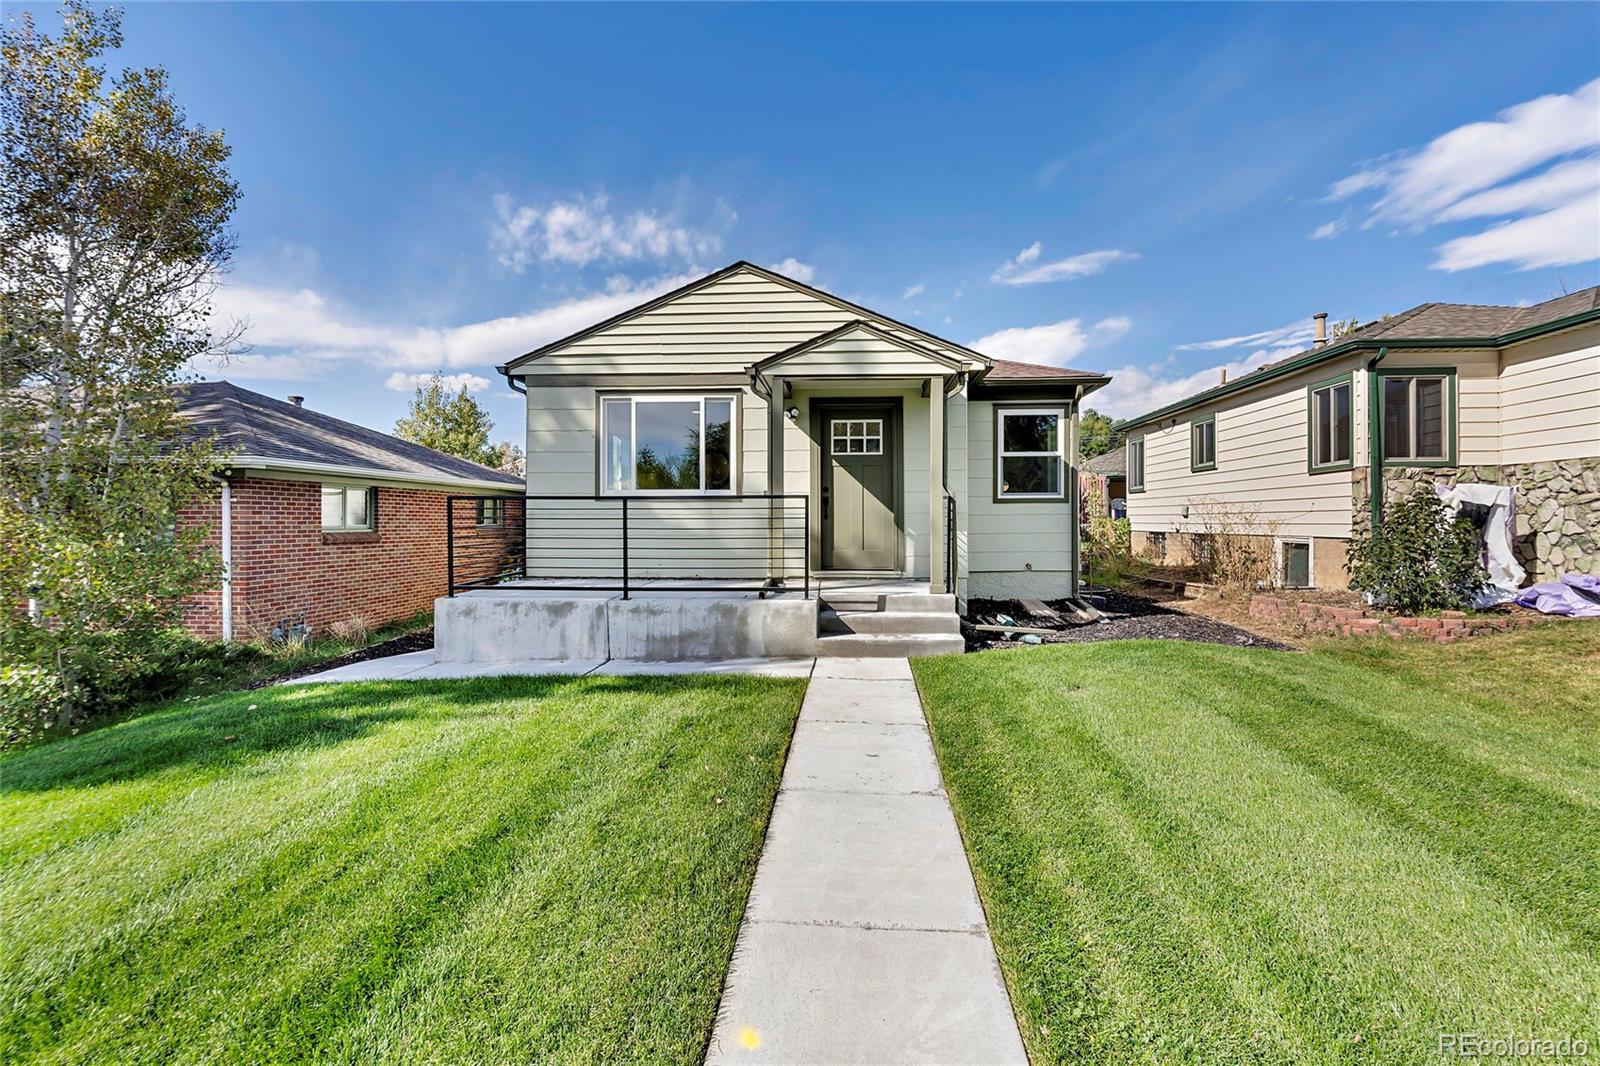 275  newton street, denver sold home. Closed on 2023-11-07 for $601,200.